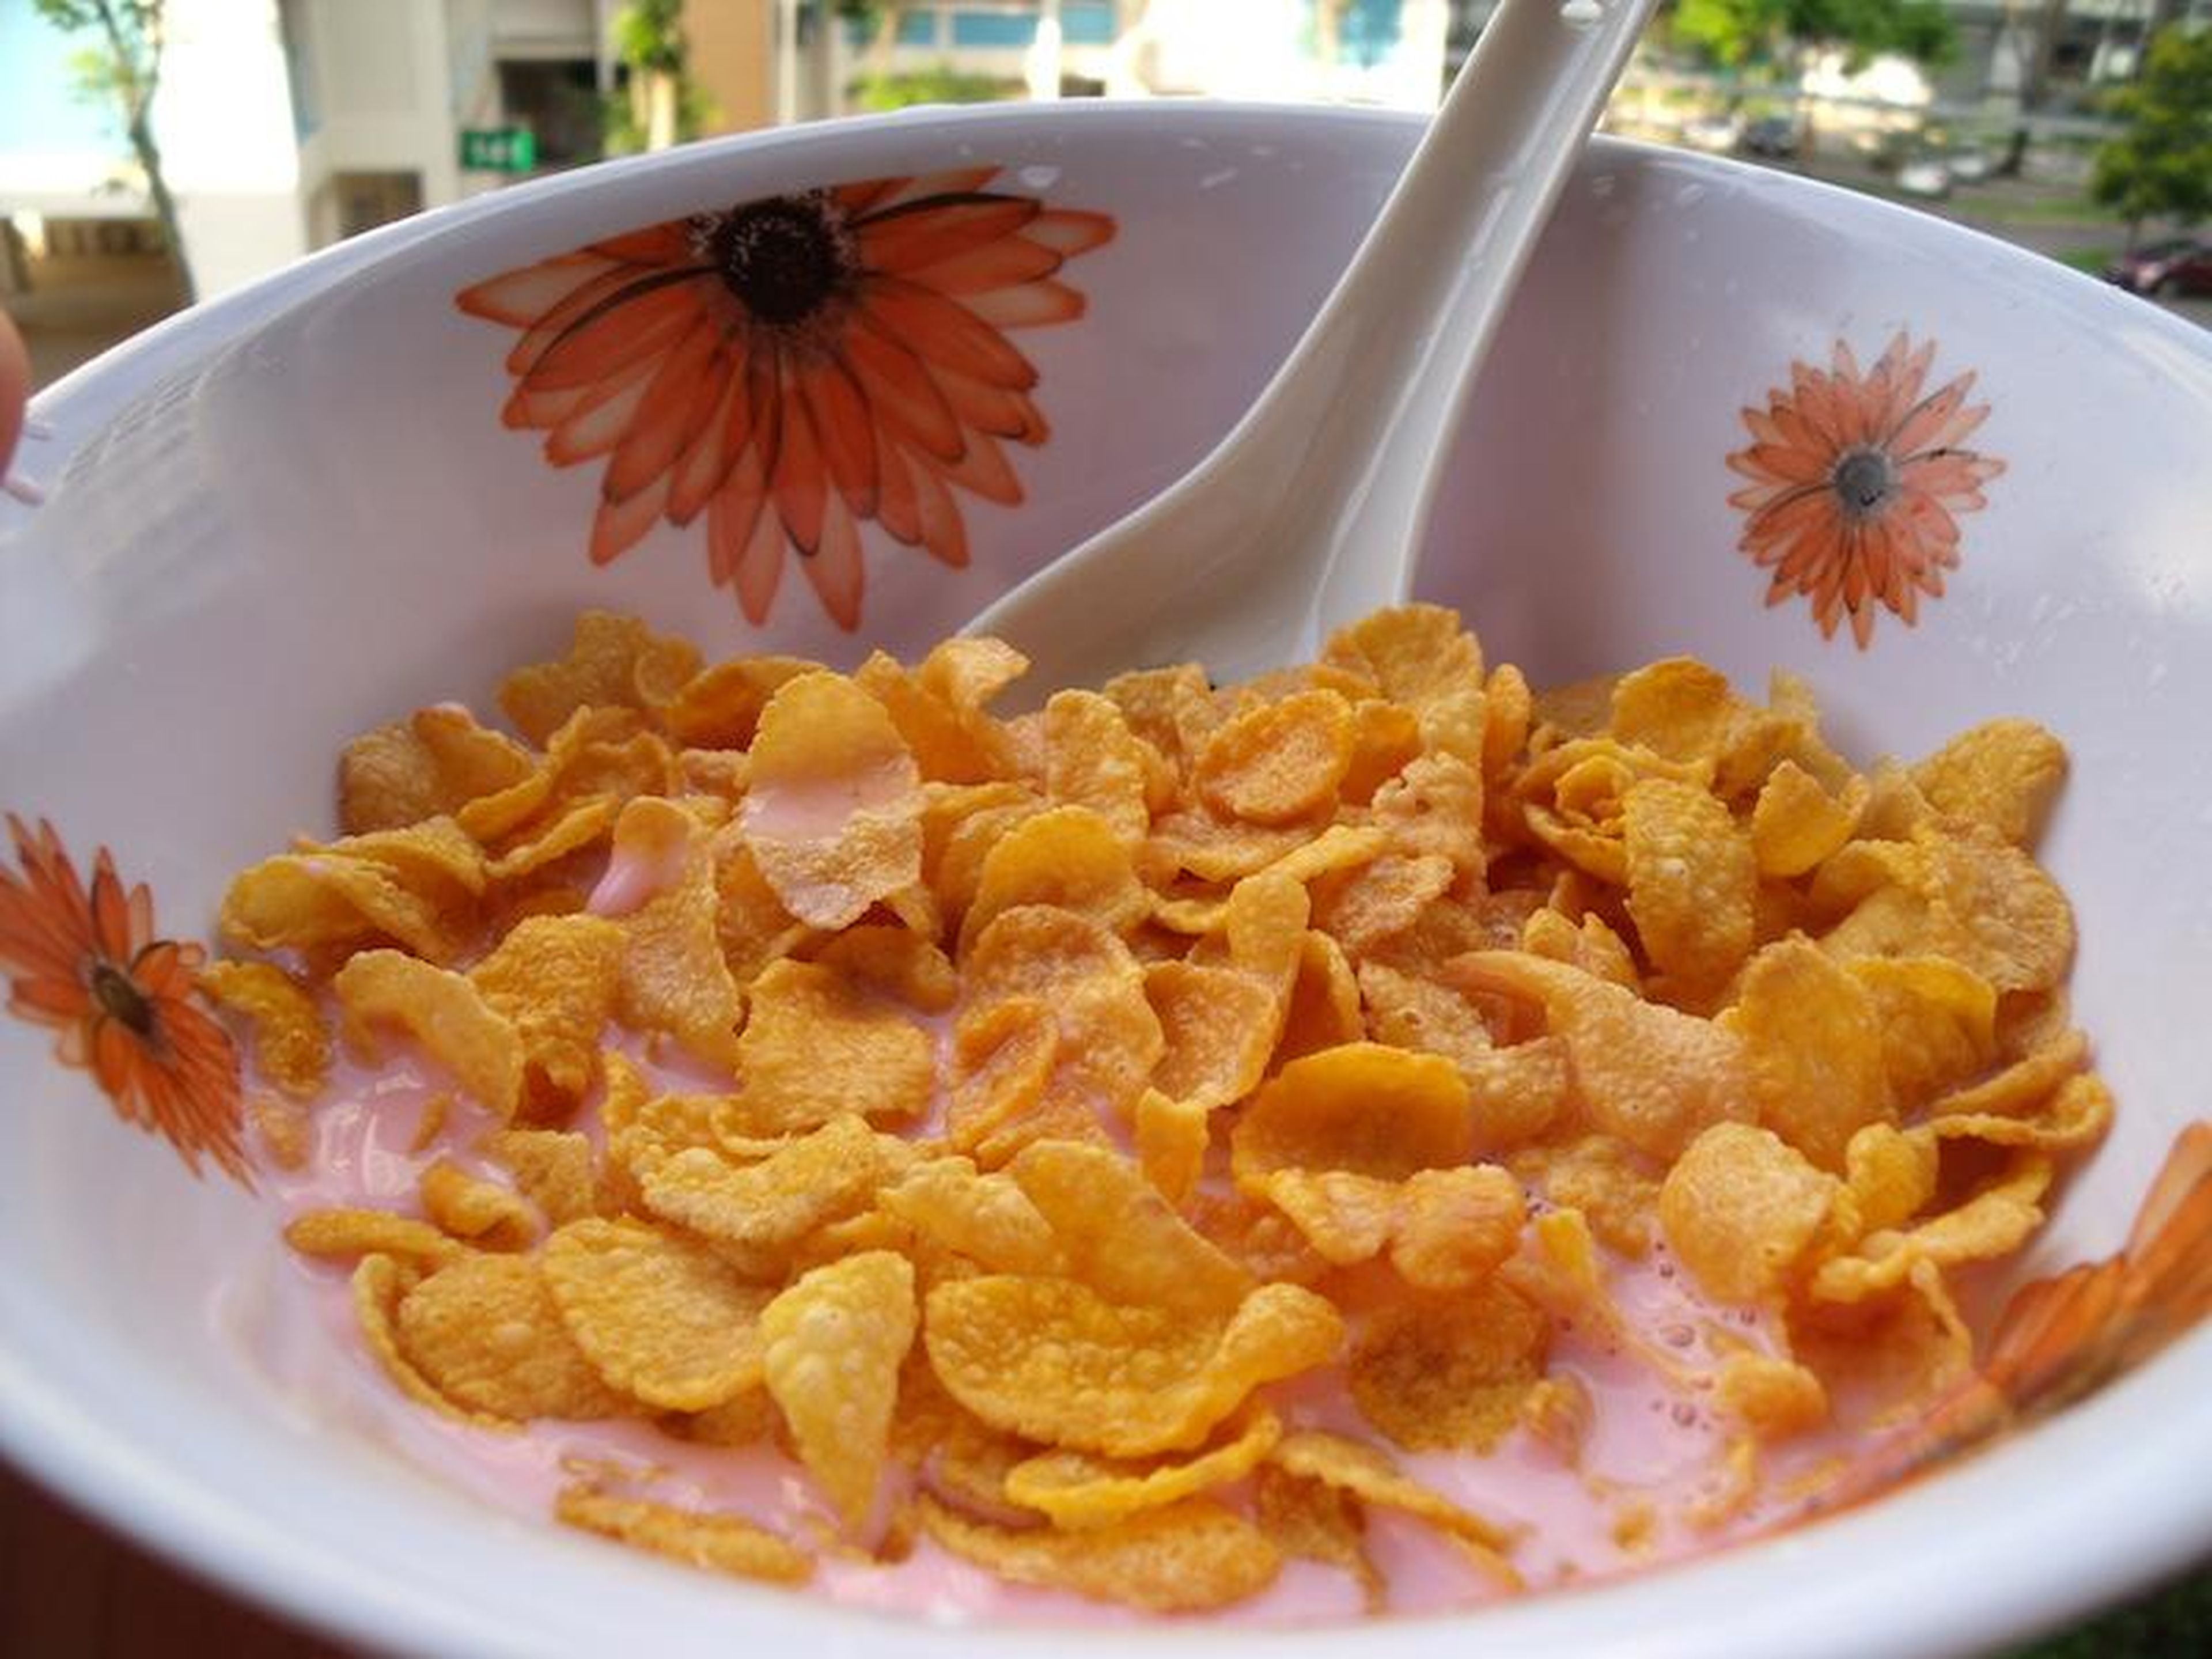 A bowl of cornflakes.